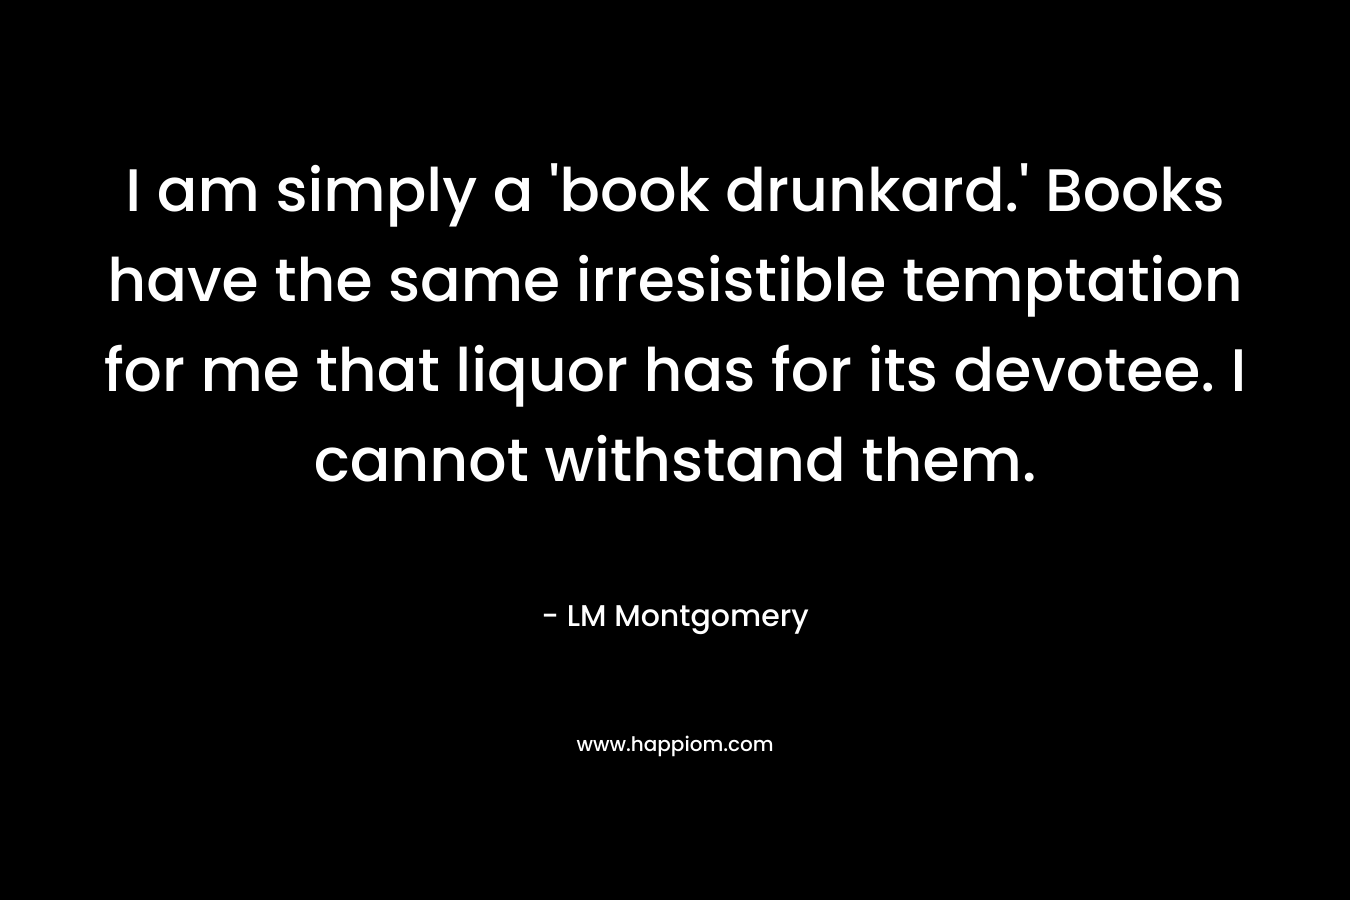 I am simply a 'book drunkard.' Books have the same irresistible temptation for me that liquor has for its devotee. I cannot withstand them.